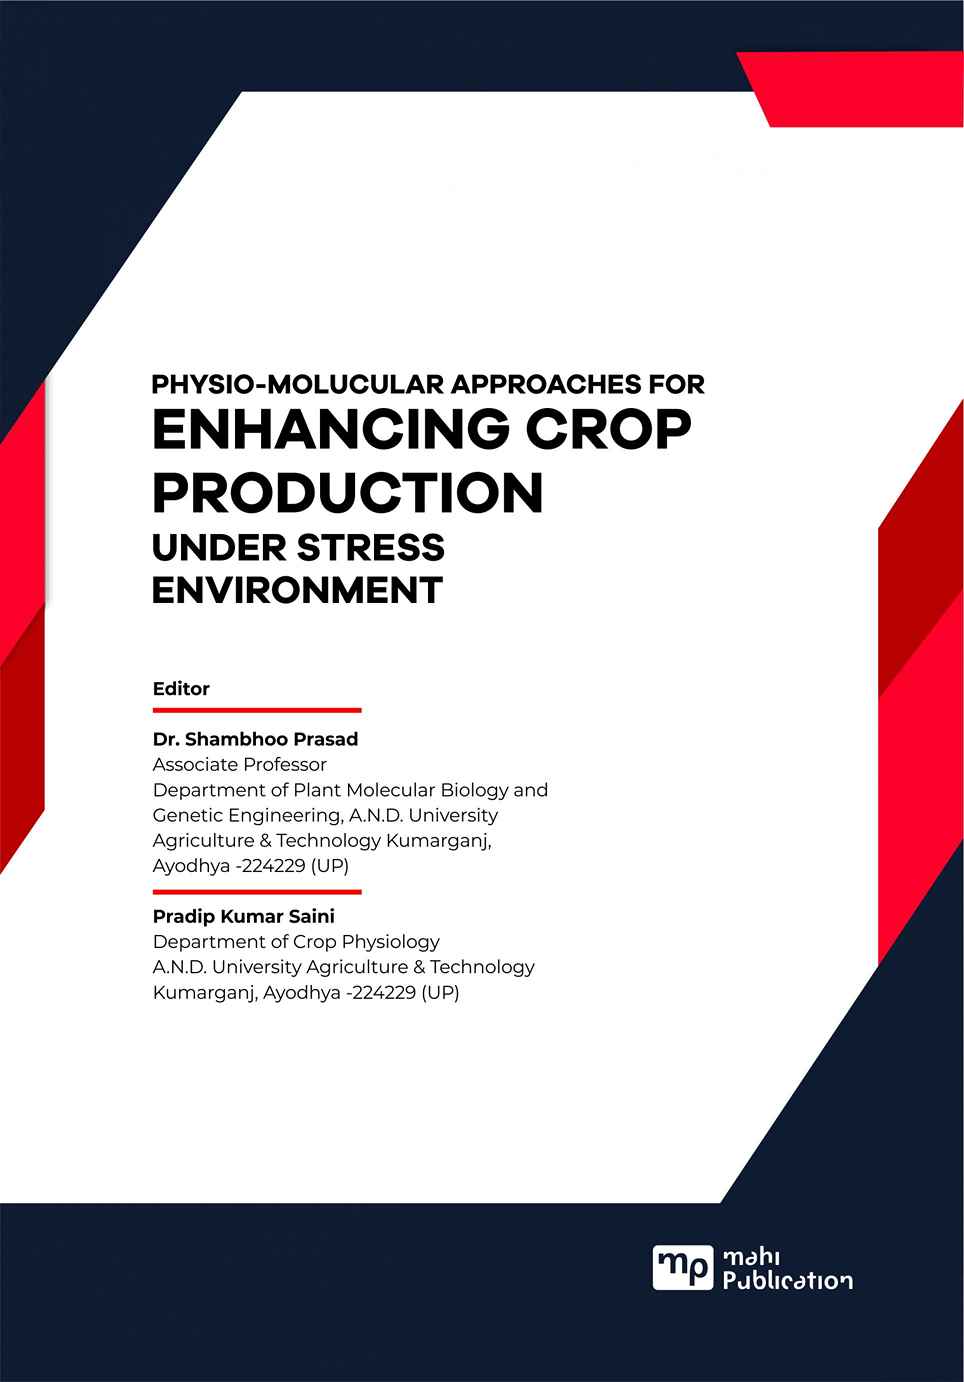 Physio-Molucular Approaches For Enhancing Crop Production Under Stress Environment